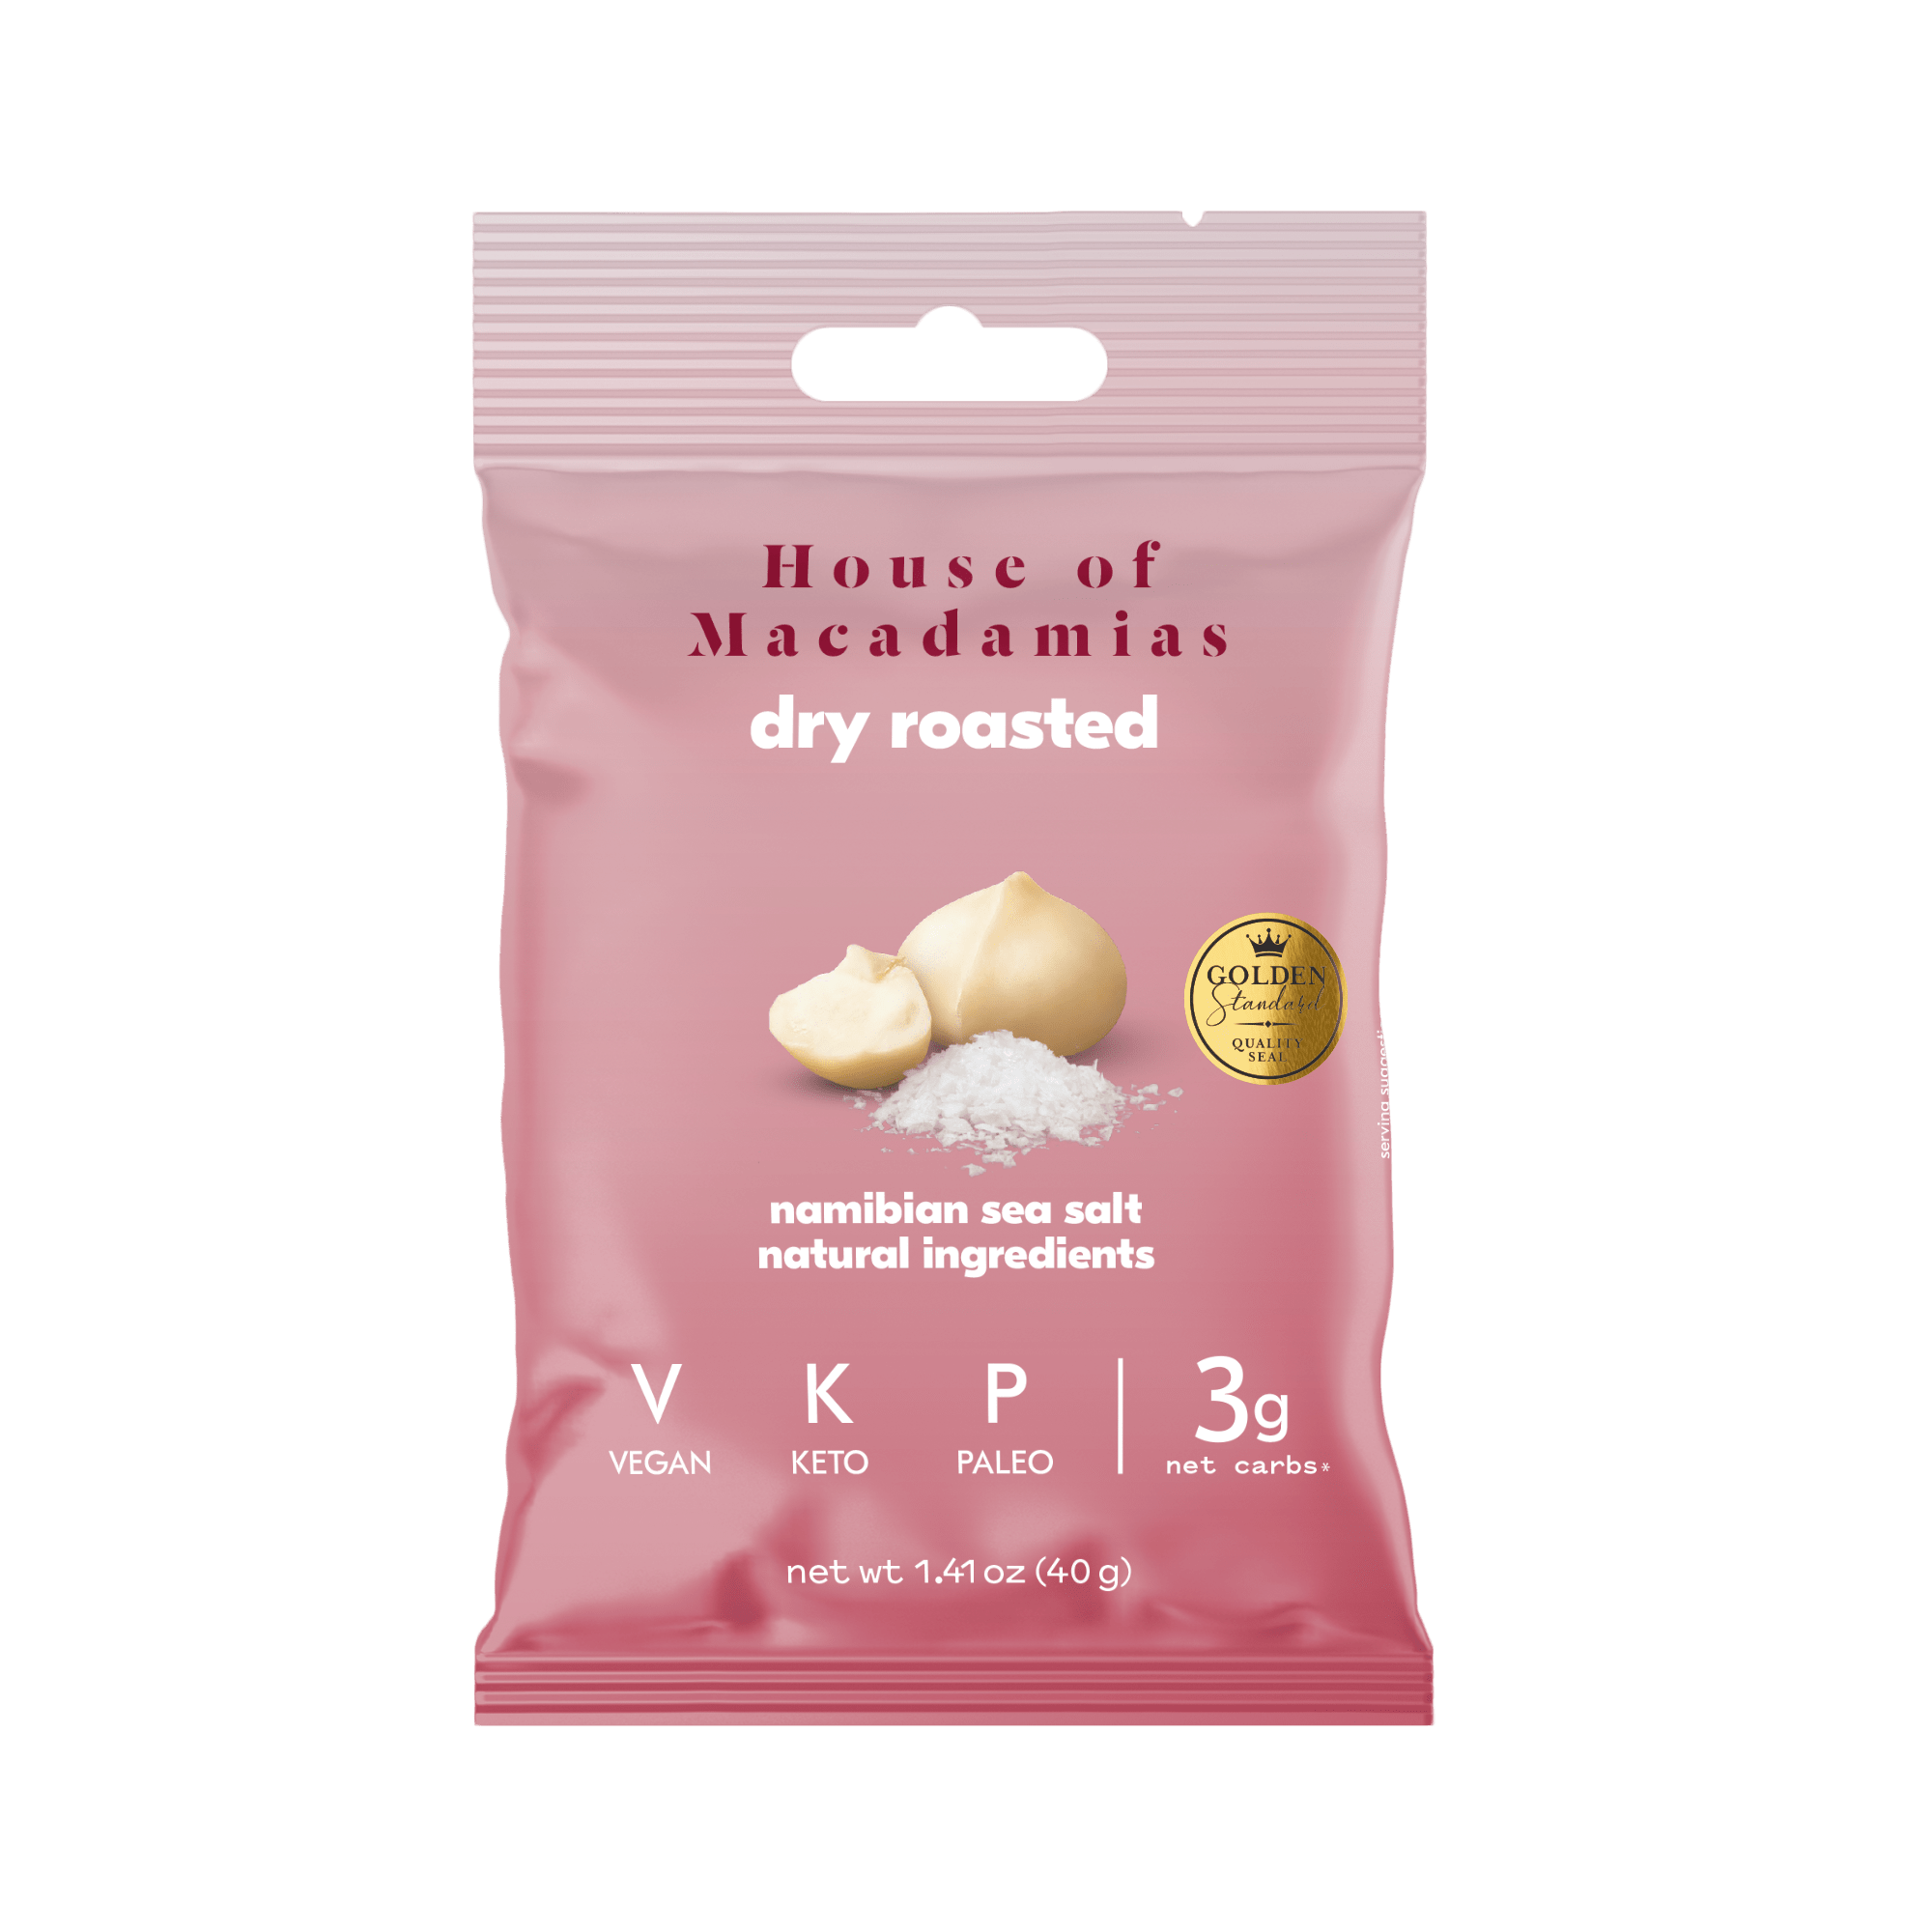 Macadamia Nut Variety Pack (6 Flavors, 12 Bags)